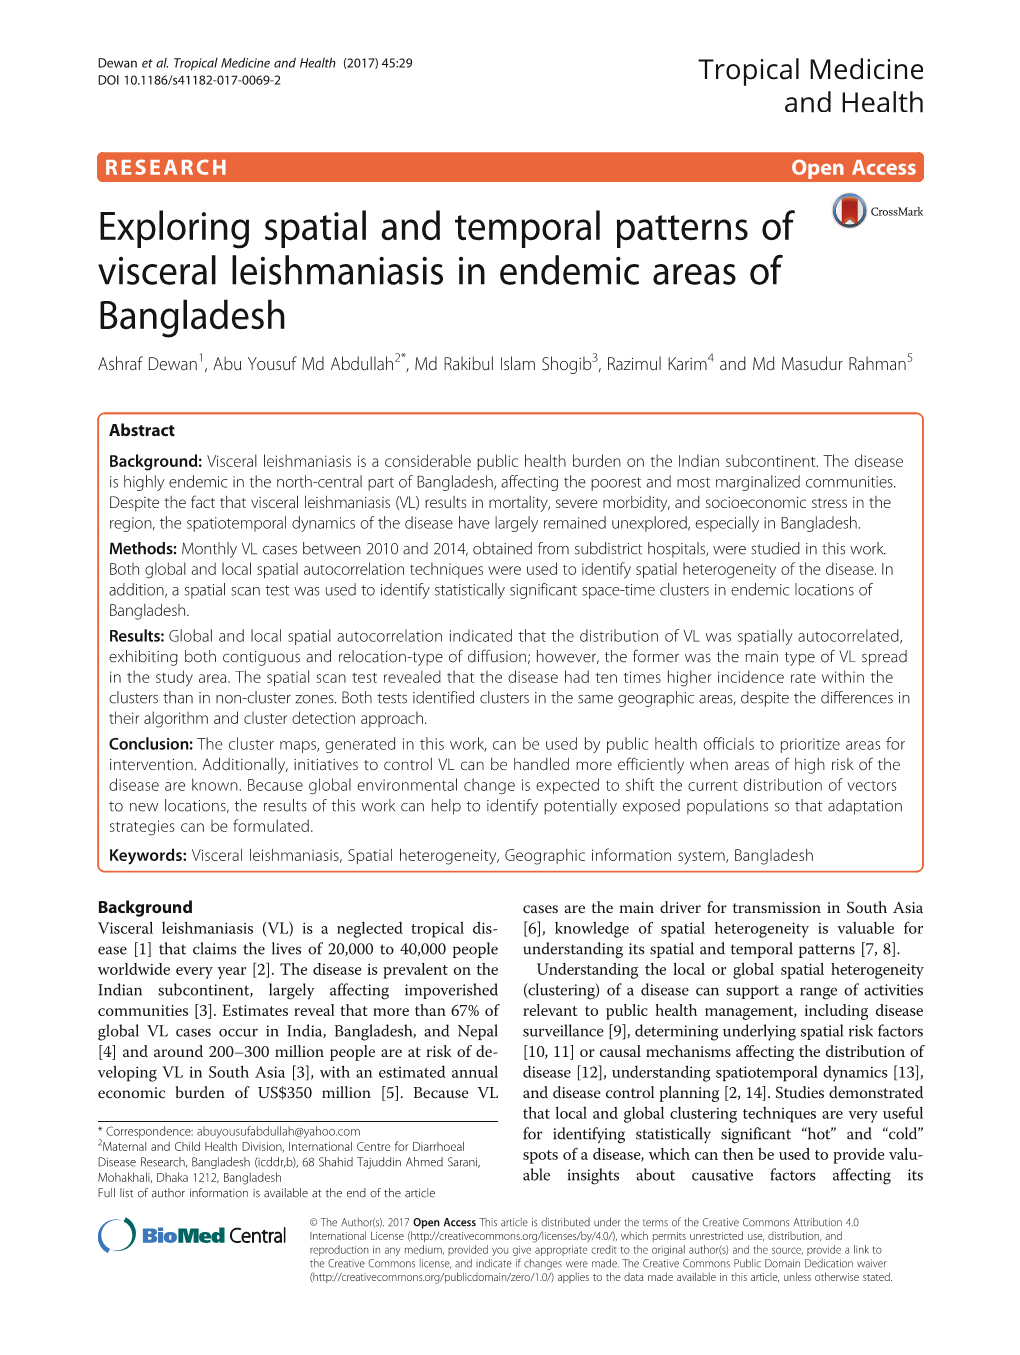 Exploring Spatial and Temporal Patterns of Visceral Leishmaniasis In